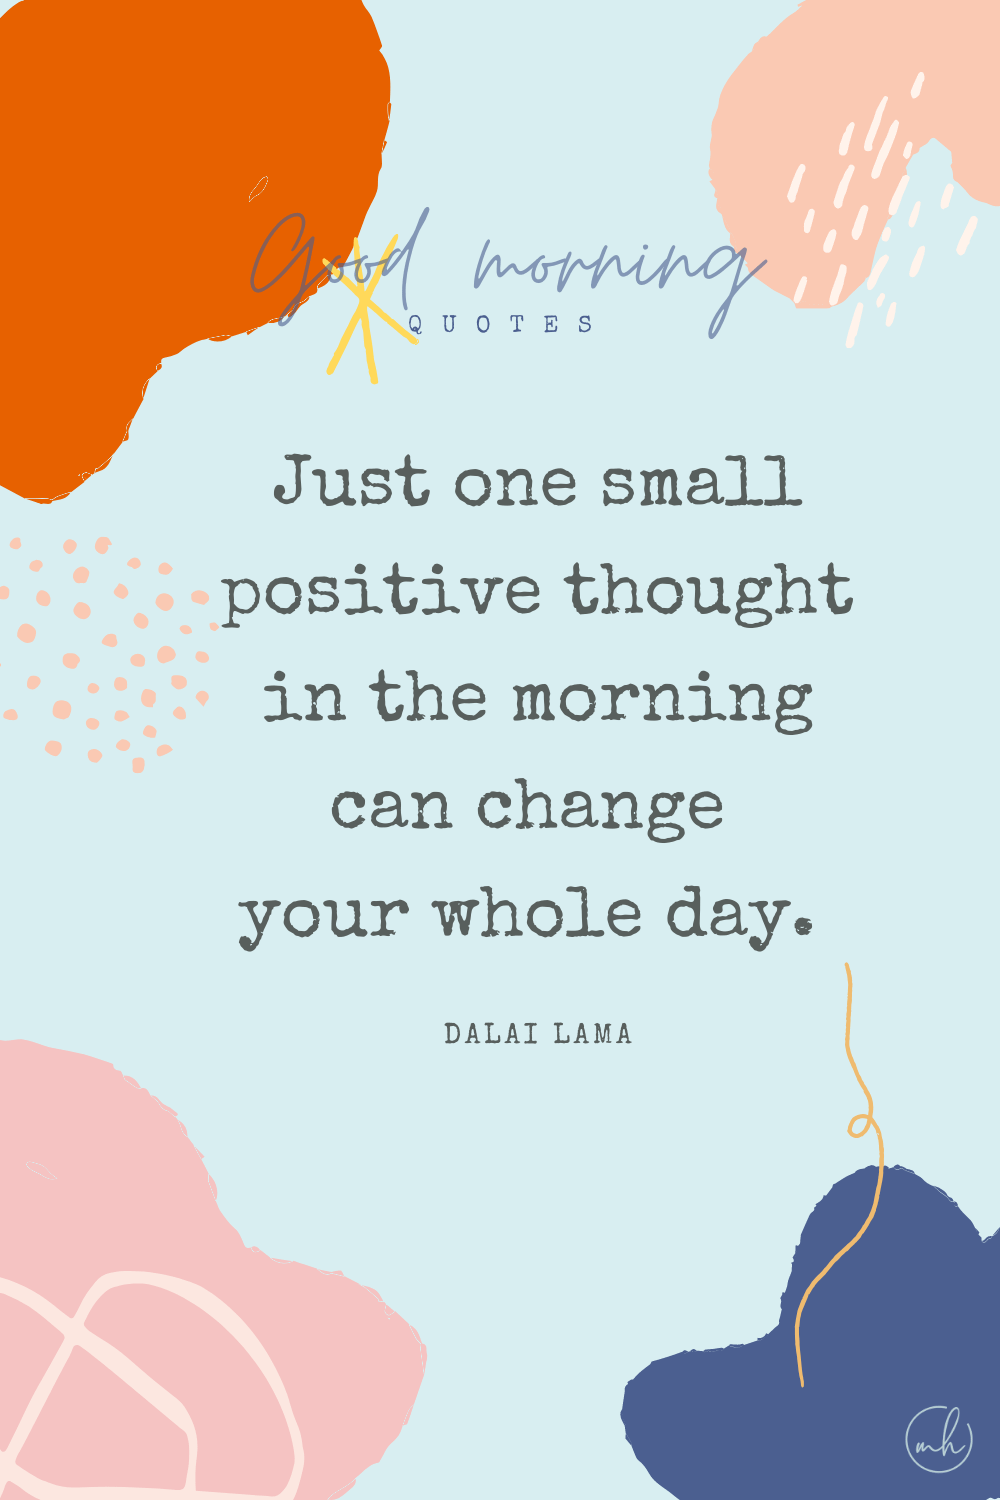 "Just one small positive thought in the morning can change your whole day." – Dalai Lama